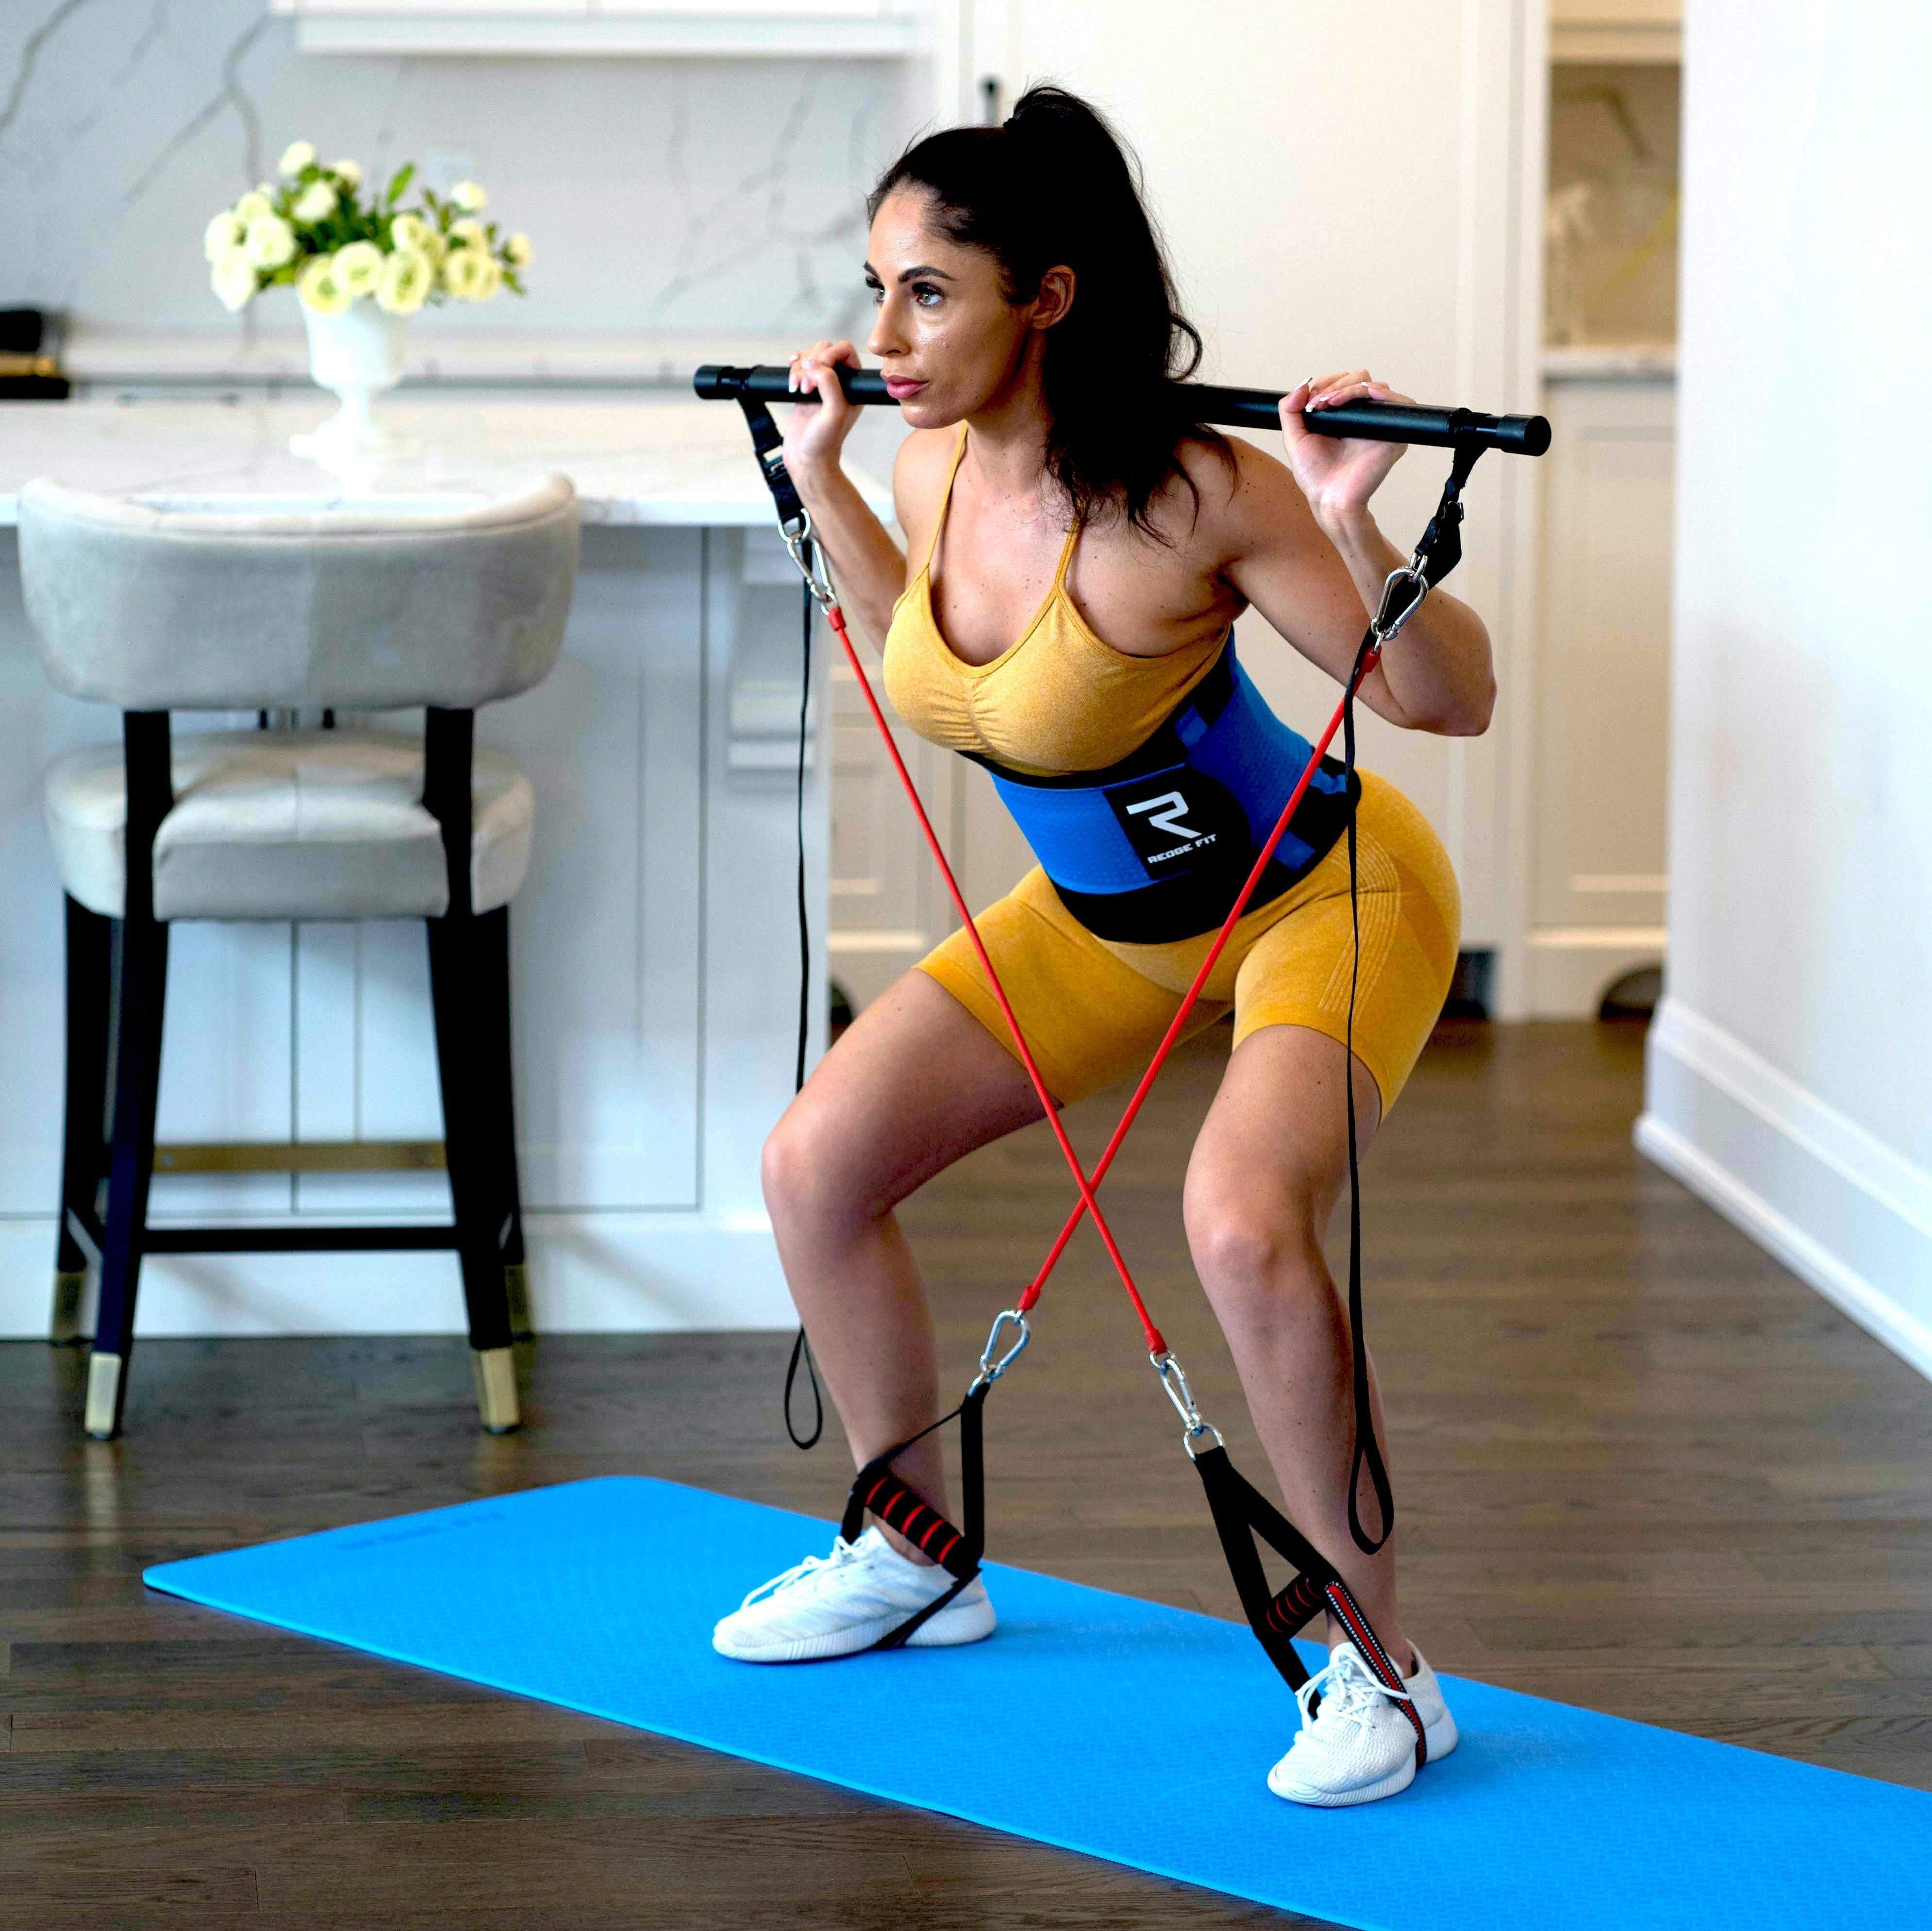 Woman modeling the Redge Fit Core Focus Starter Pack Portable Gym Machine and Yoga Mat Available at https://www.getredge.com/products/core-focus-all-in-one-pack-1 